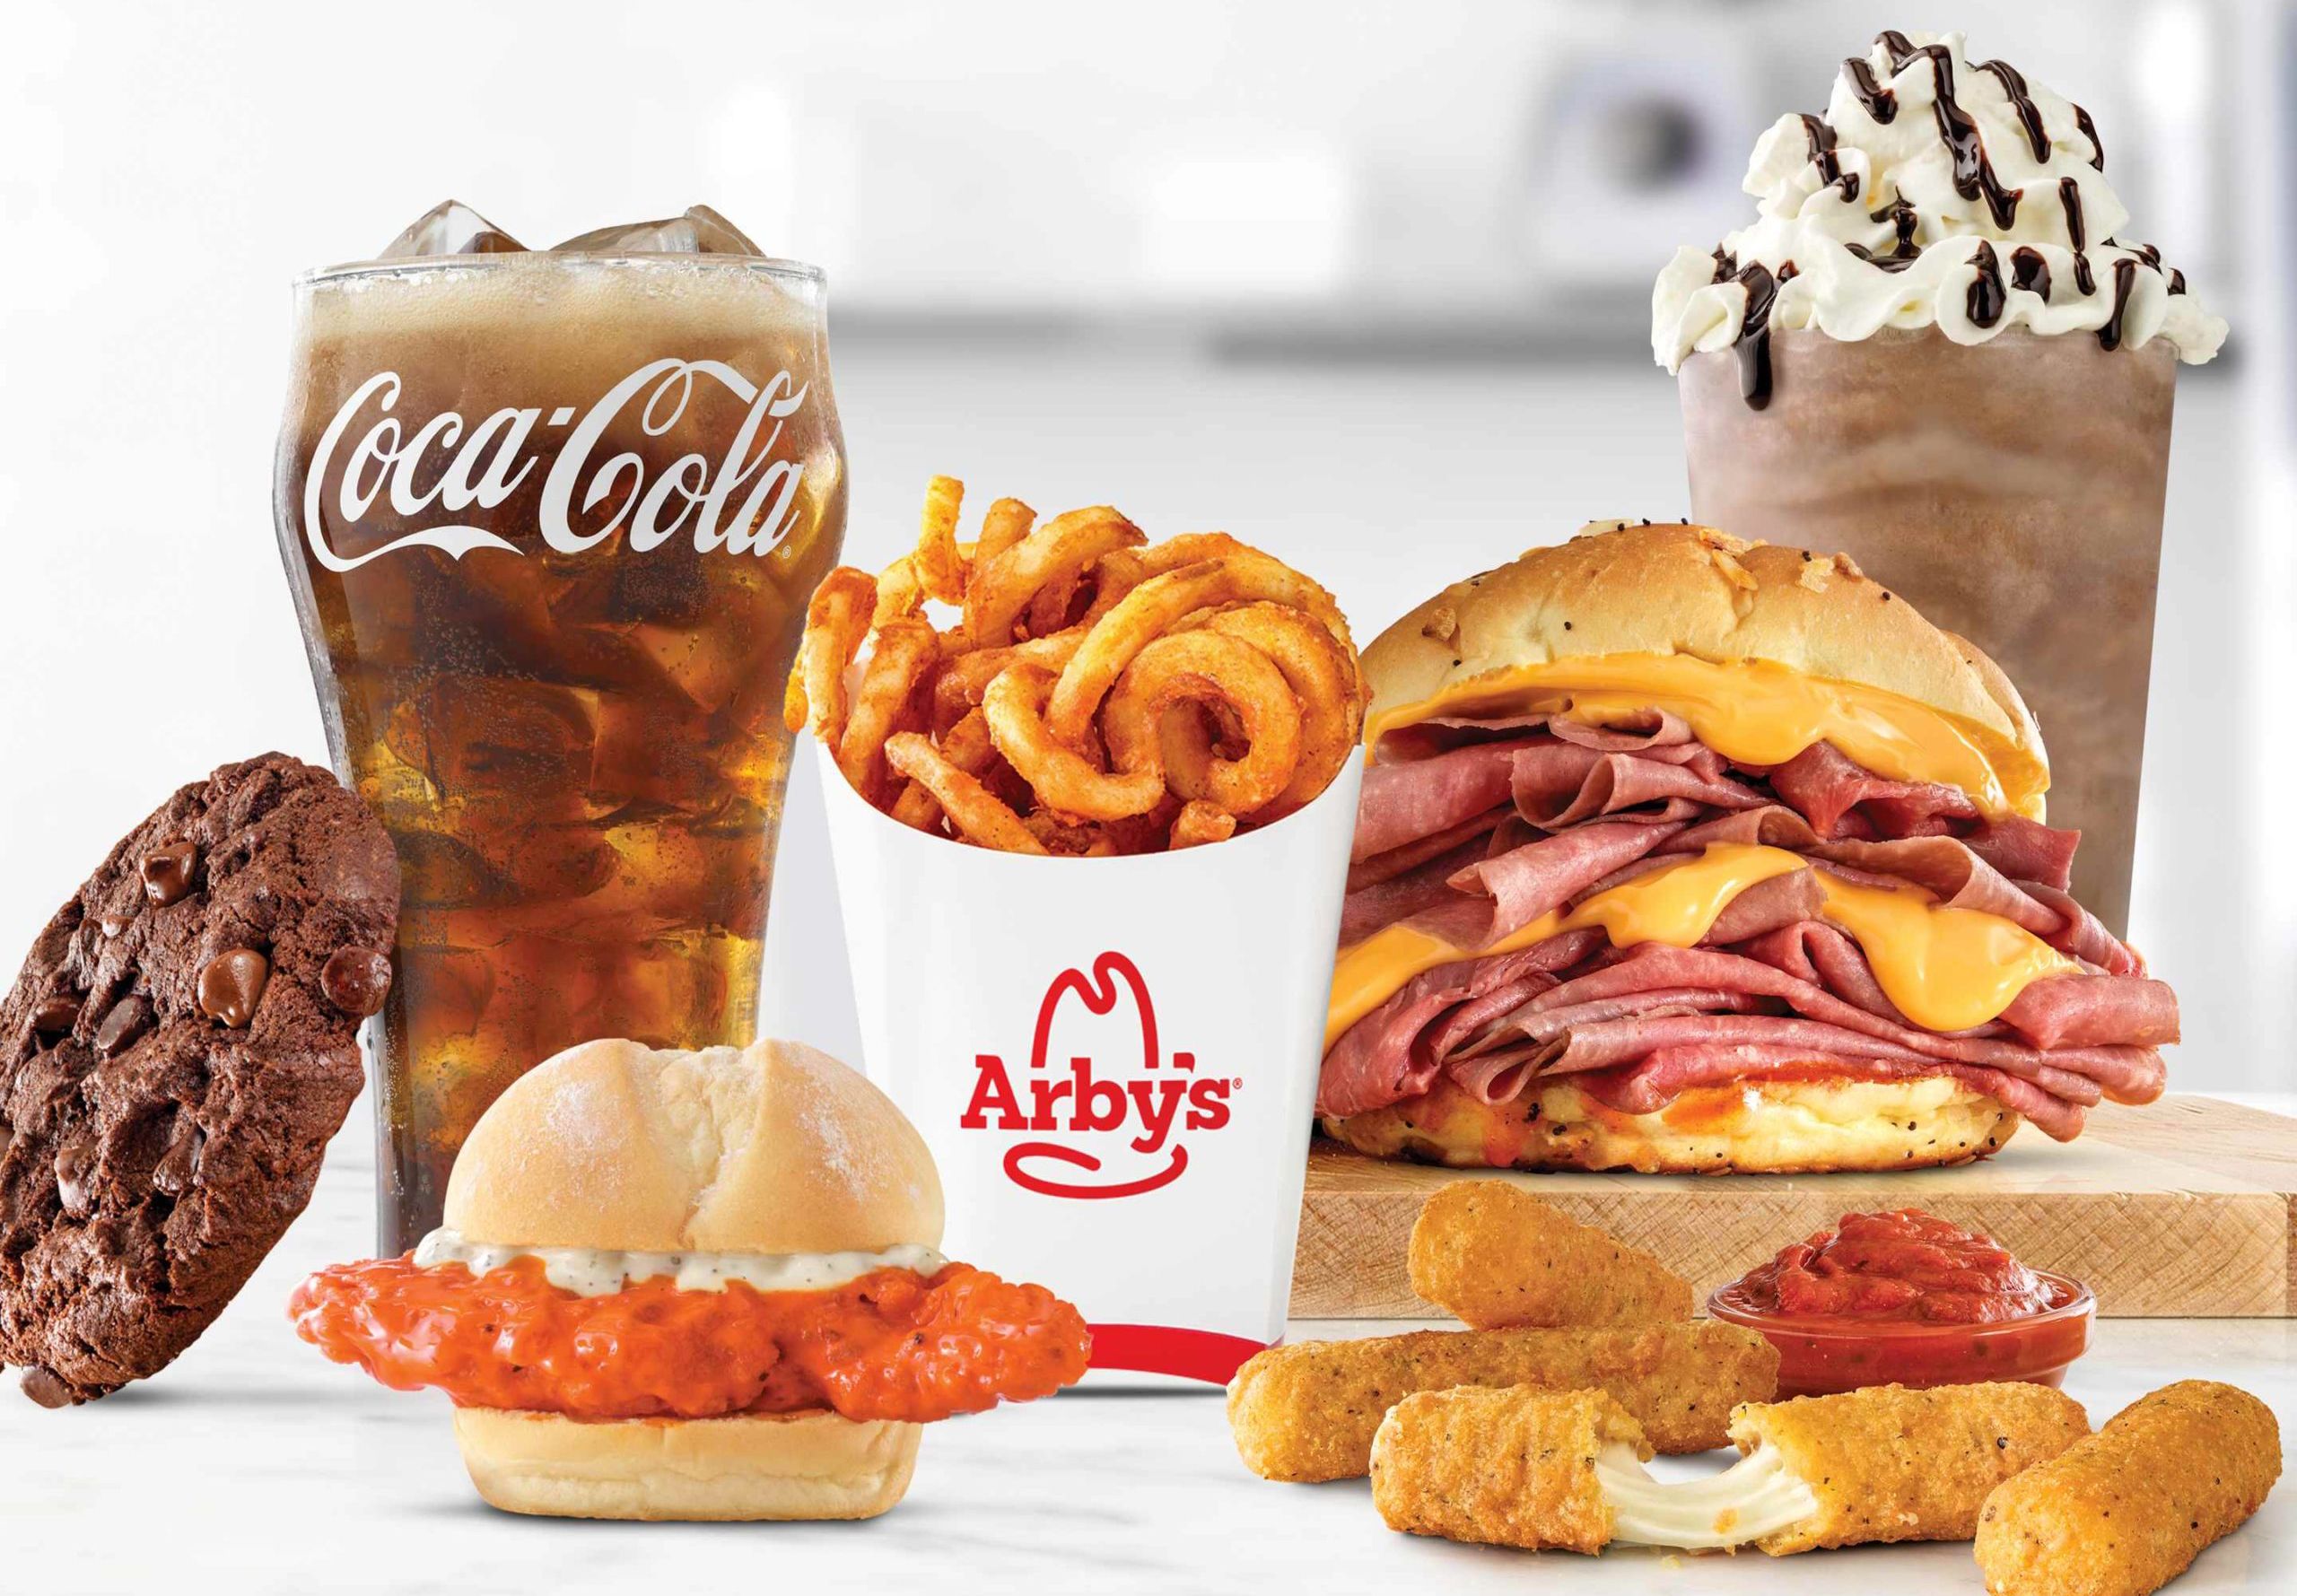 Get 23% Off Your Next Arby’s Order From December 31 to January 3: An Arby’s Rewards Exclusive